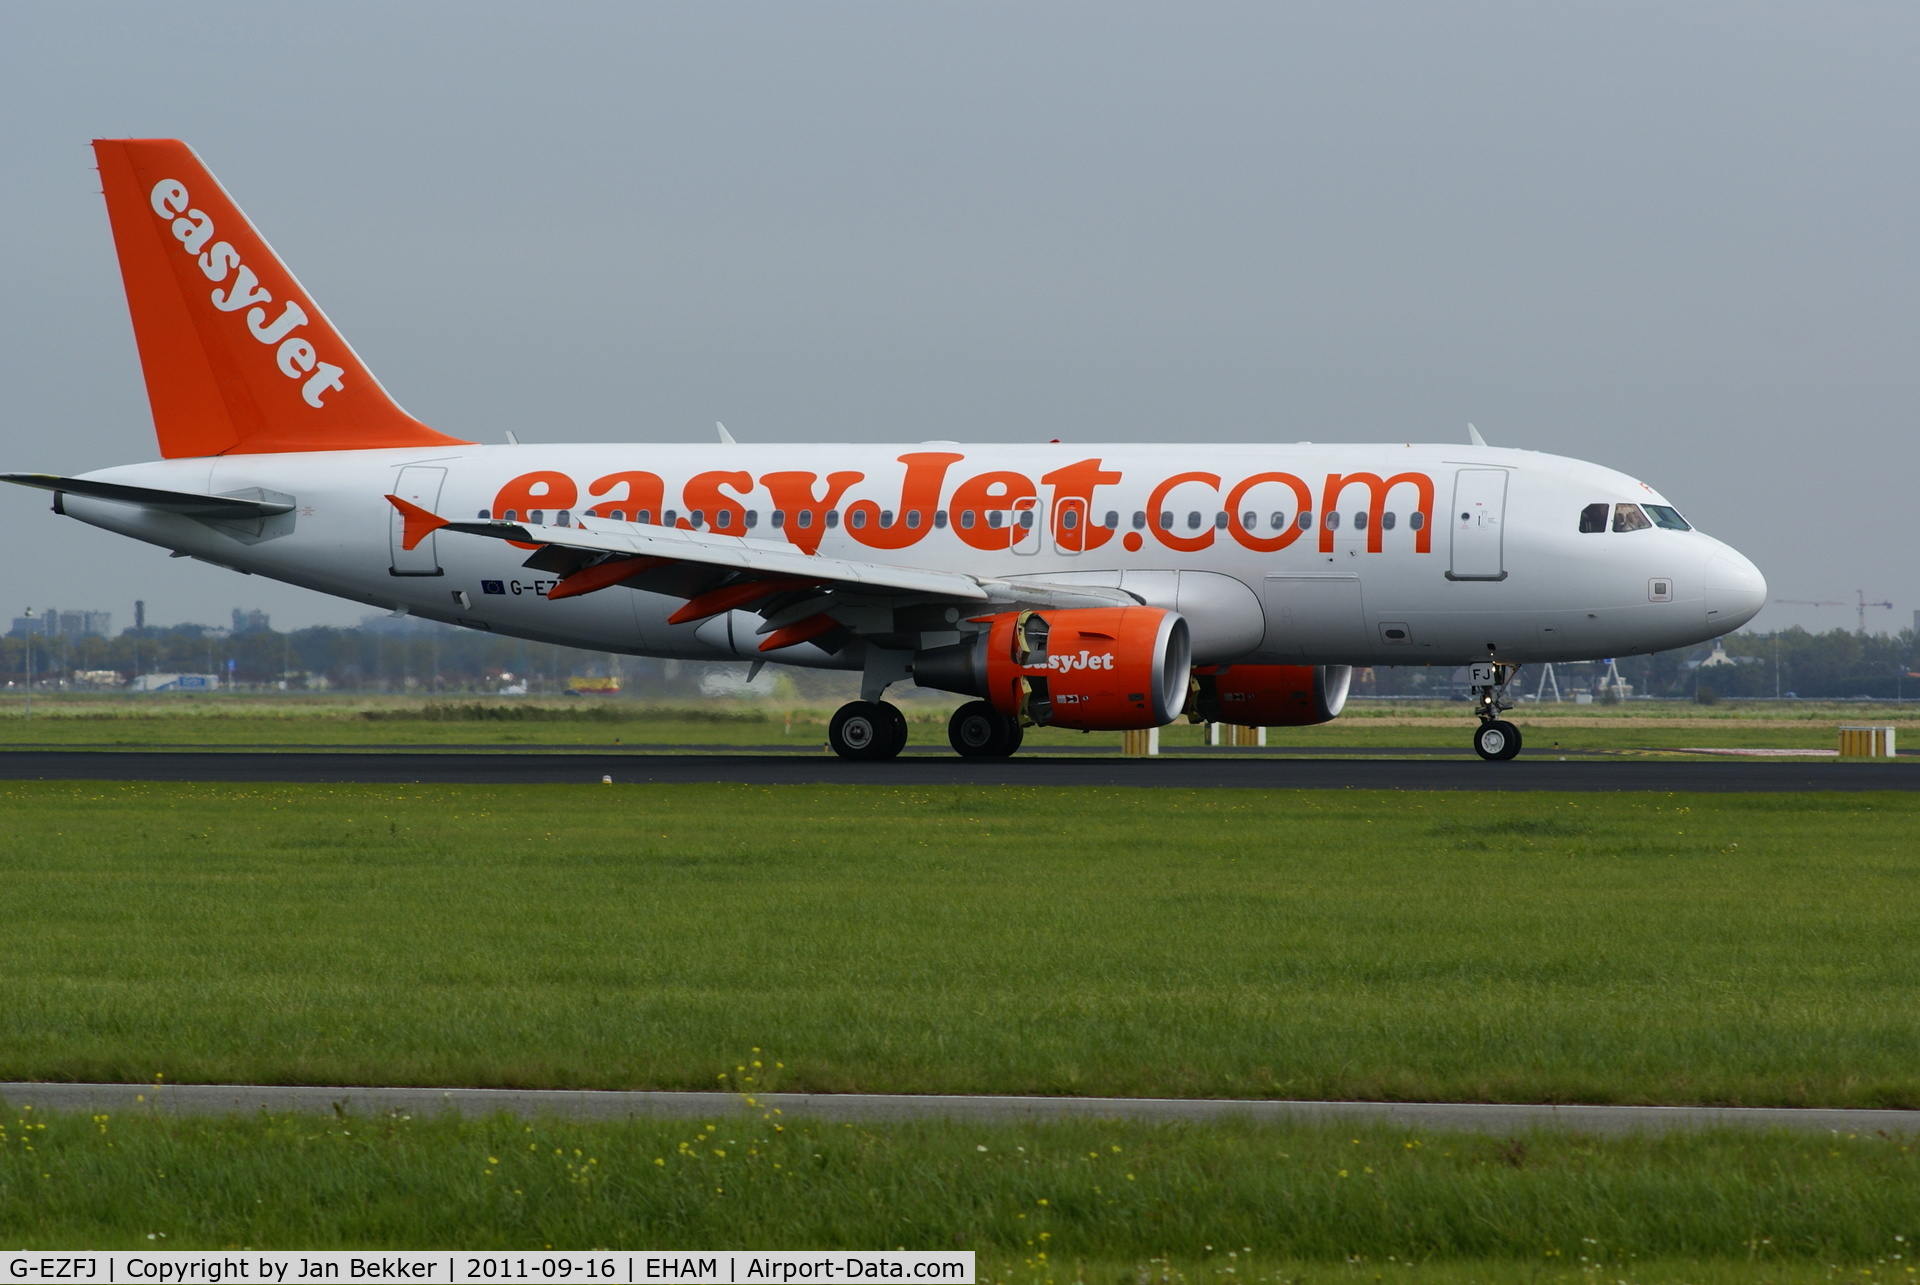 G-EZFJ, 2009 Airbus A319-111 C/N 4040, Just after landing on the Polderbaan at Schiphol.